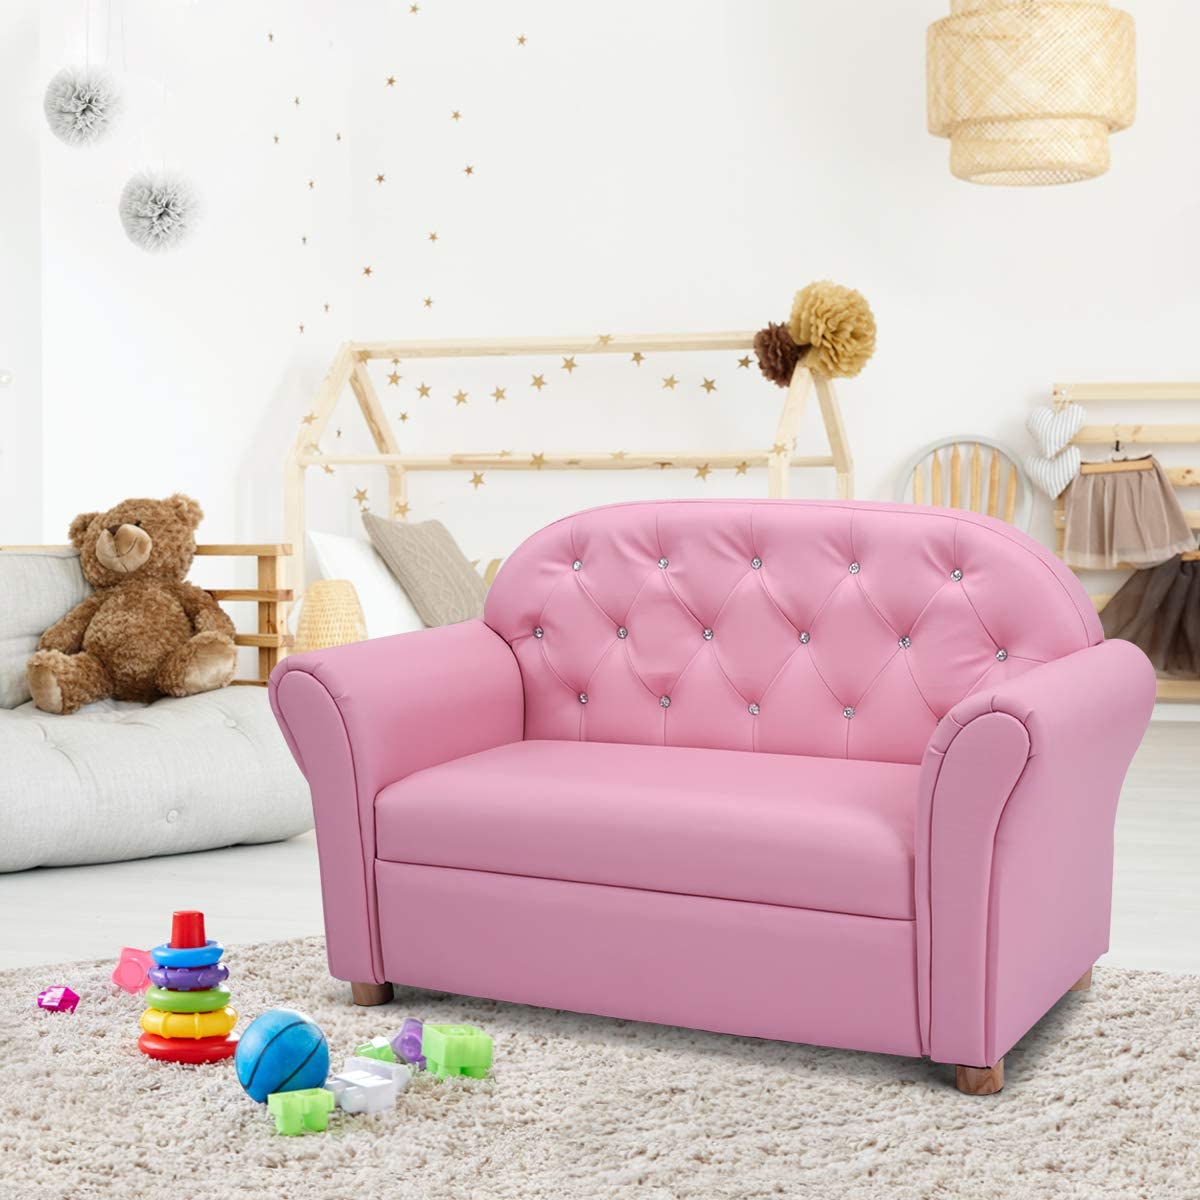 Costzon Kids, PU Leather Upholstered